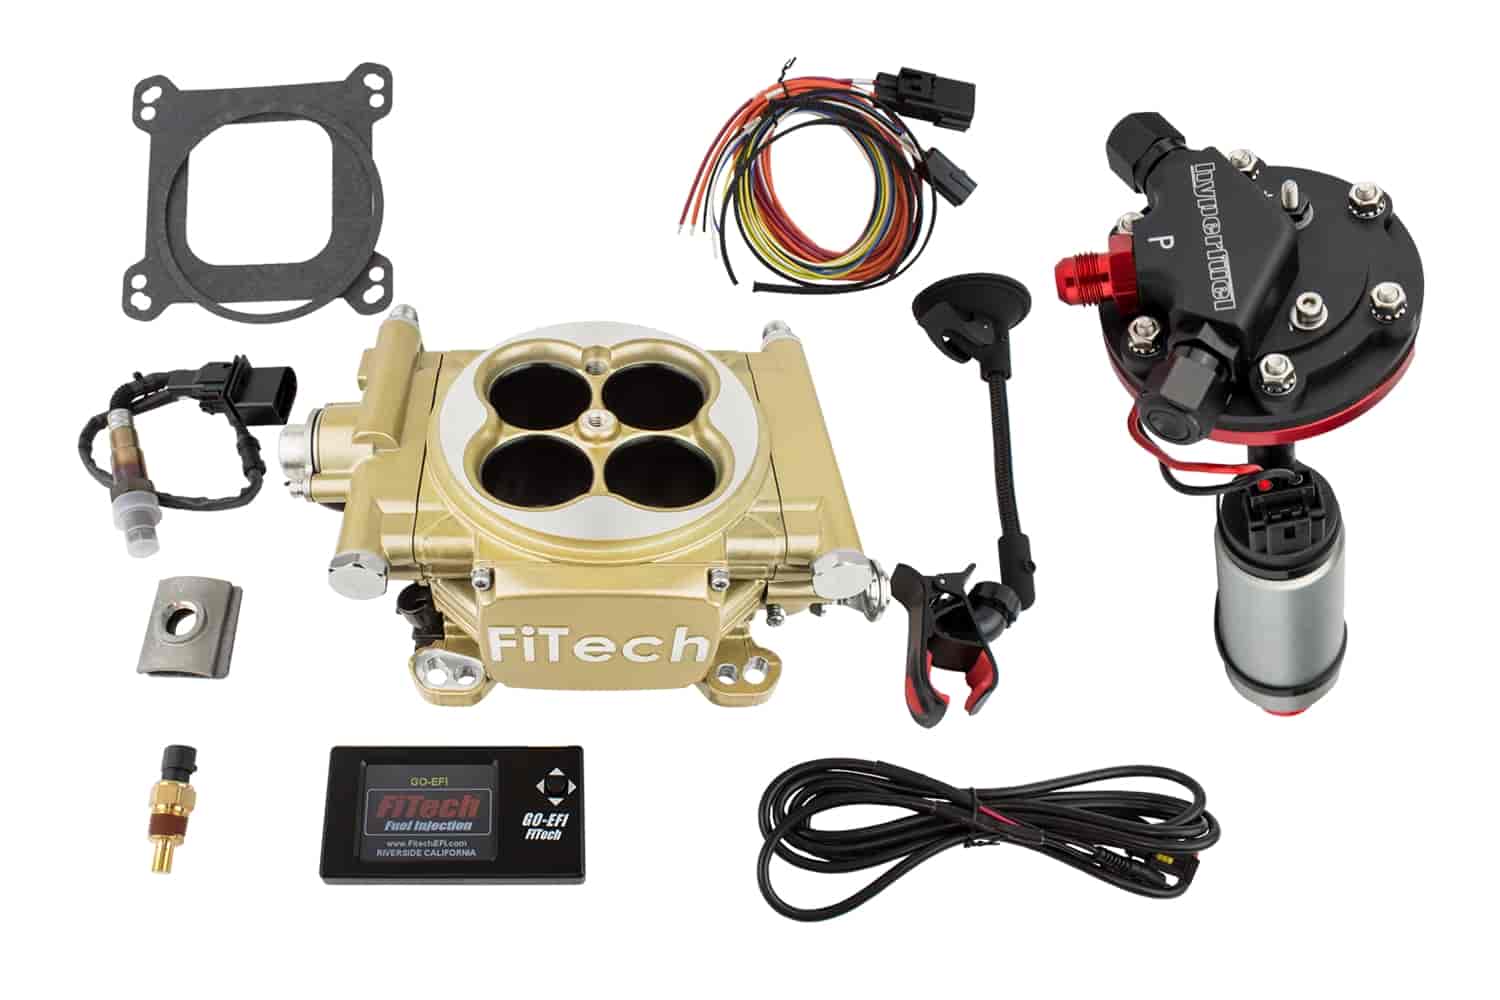 Easy Street EFI 600 HP Throttle Body System Kit with Hy-Fuel Tight-Fit In-Tank Retro Fit Kit